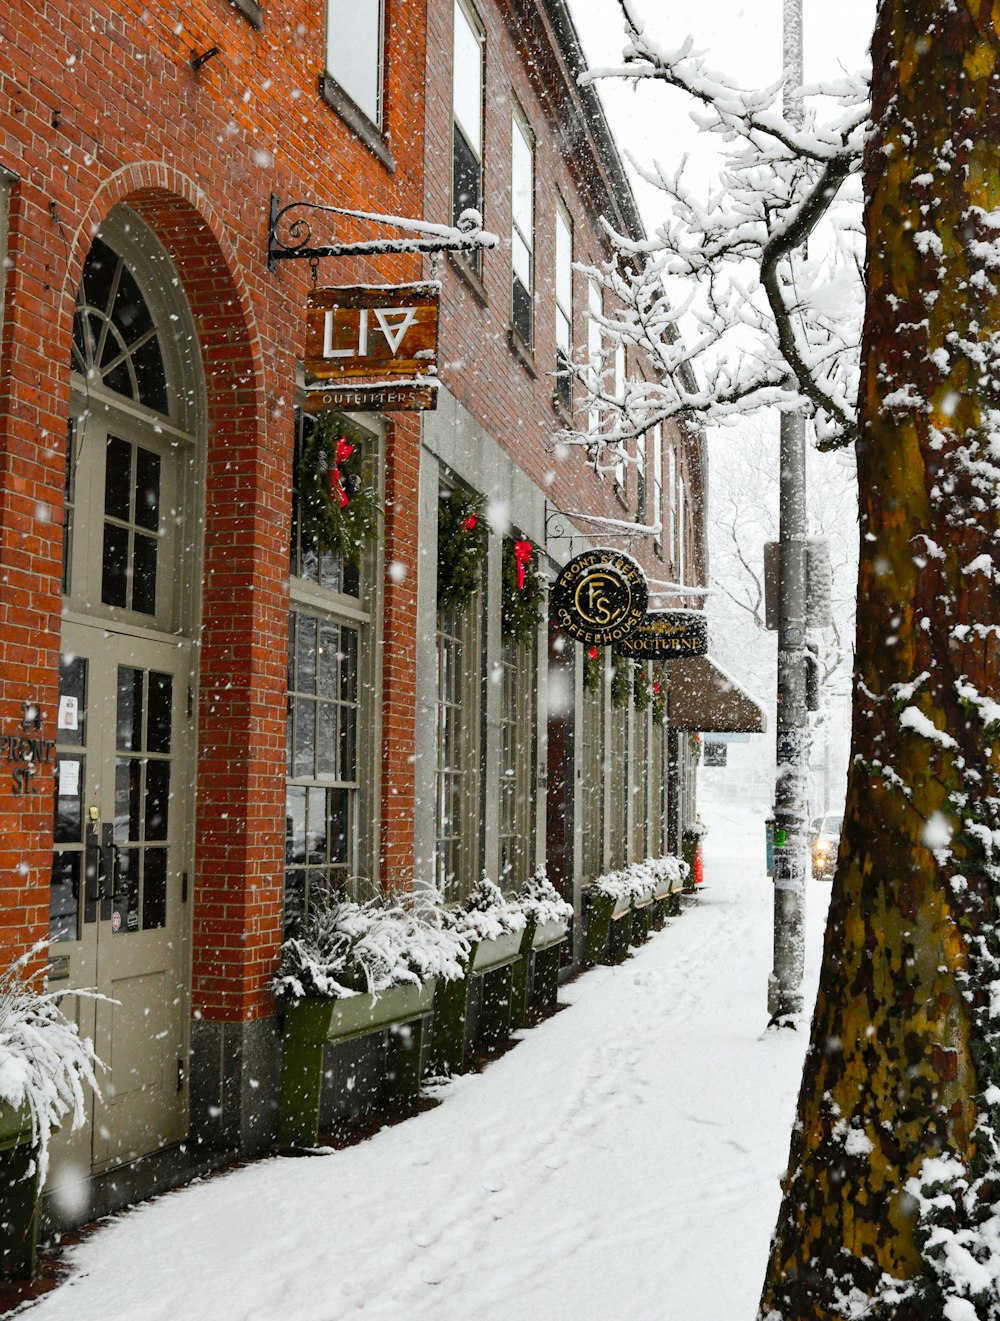 a snow covered street with a red brick building